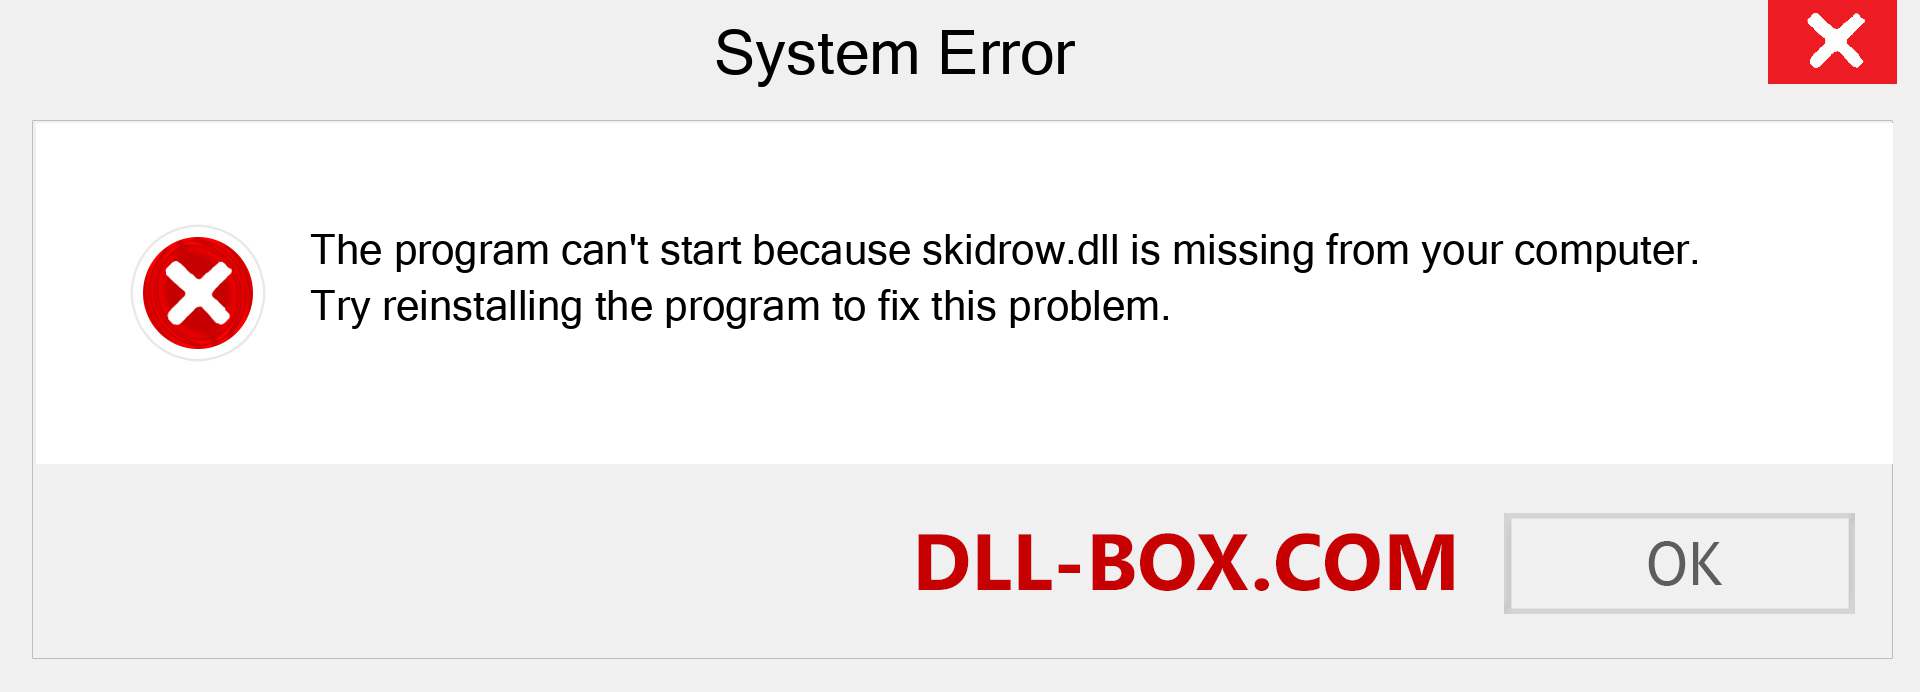  skidrow.dll file is missing?. Download for Windows 7, 8, 10 - Fix  skidrow dll Missing Error on Windows, photos, images